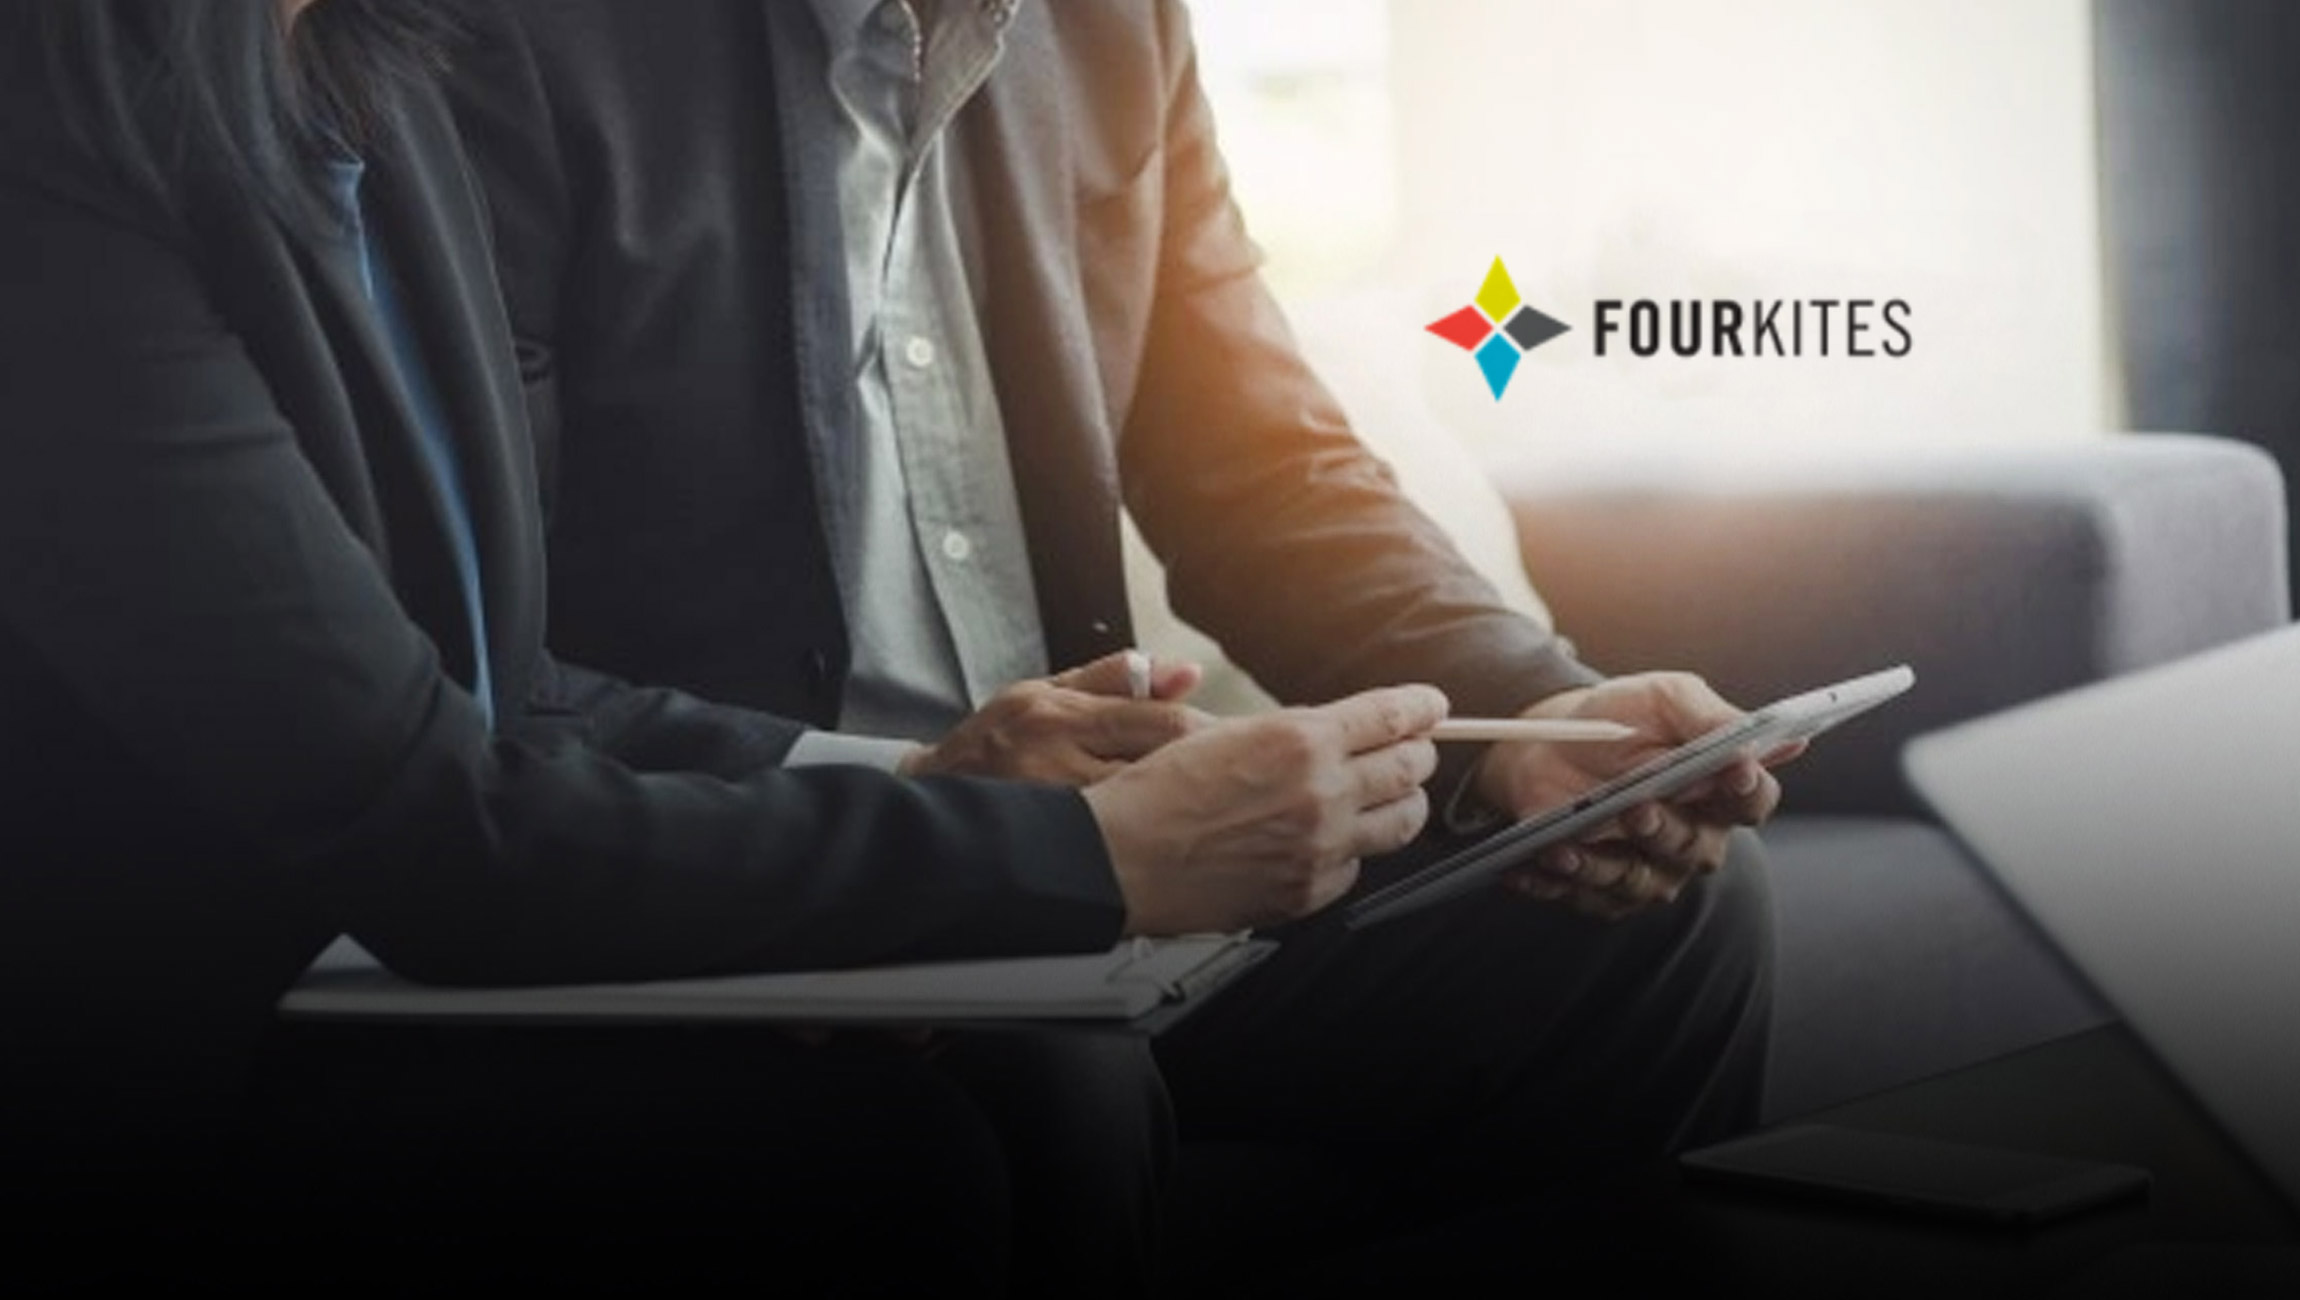 FourKites Names 60+ Customers as Innovation Partners to Accelerate Supply Chain Innovation and Increase Business Value